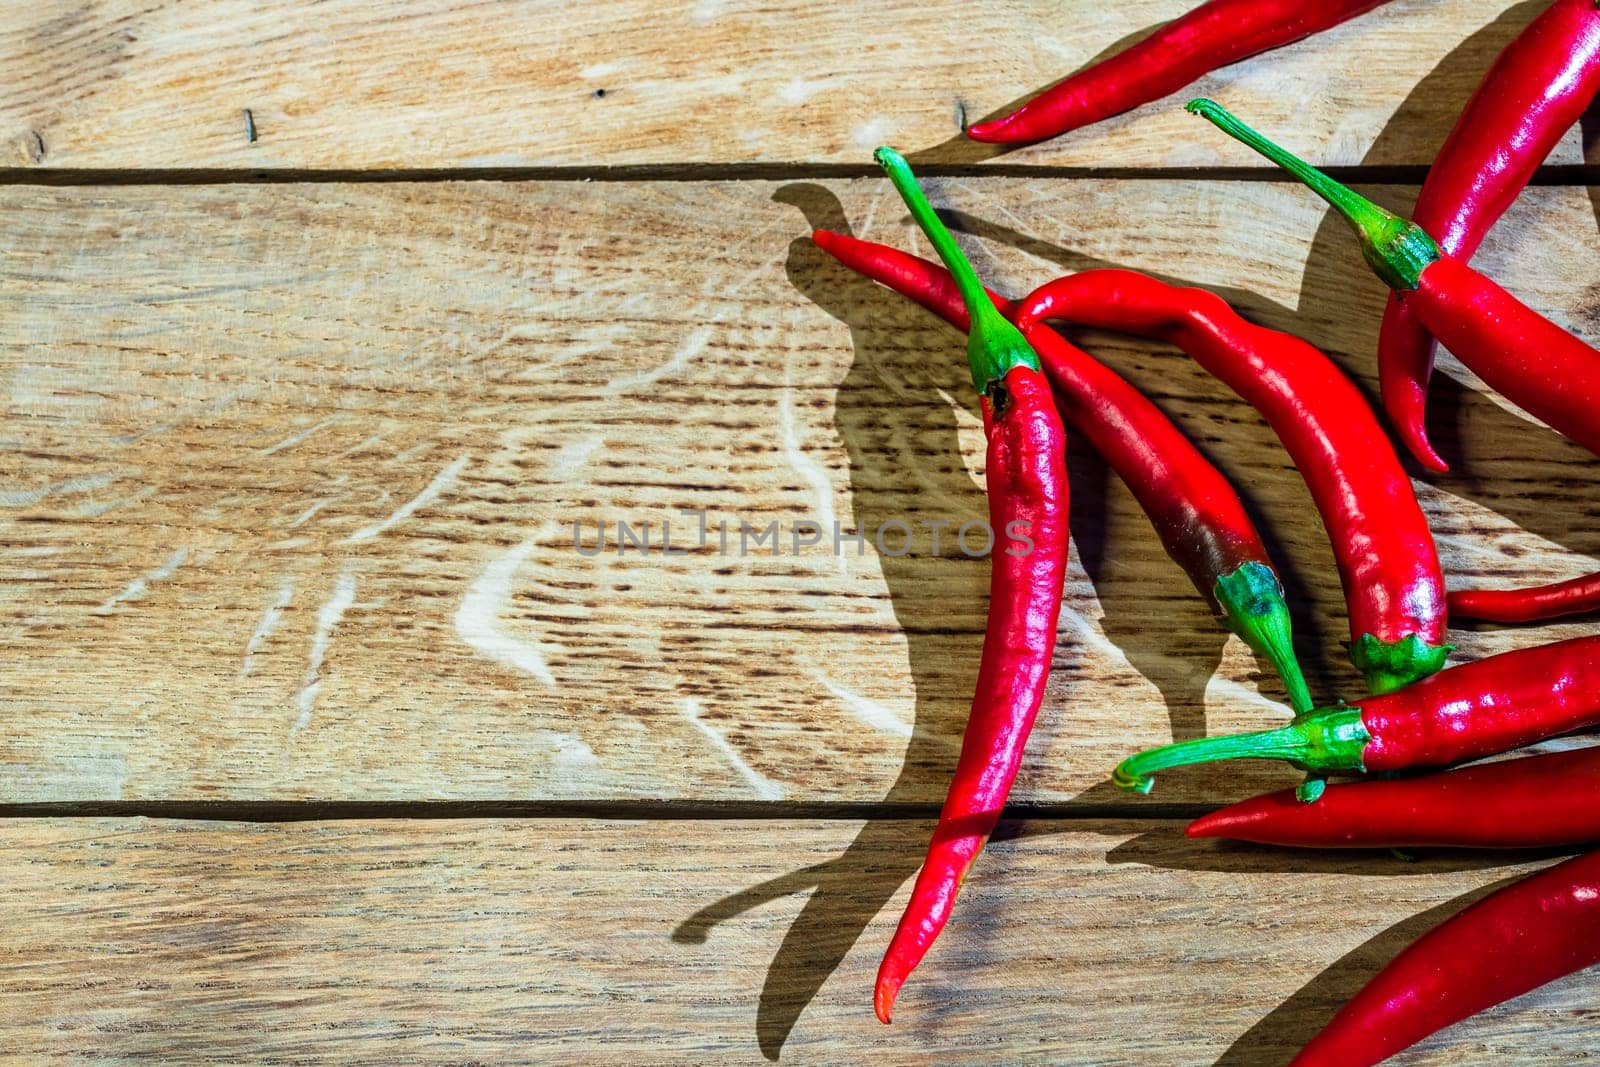 Red hot peppers on wooden table